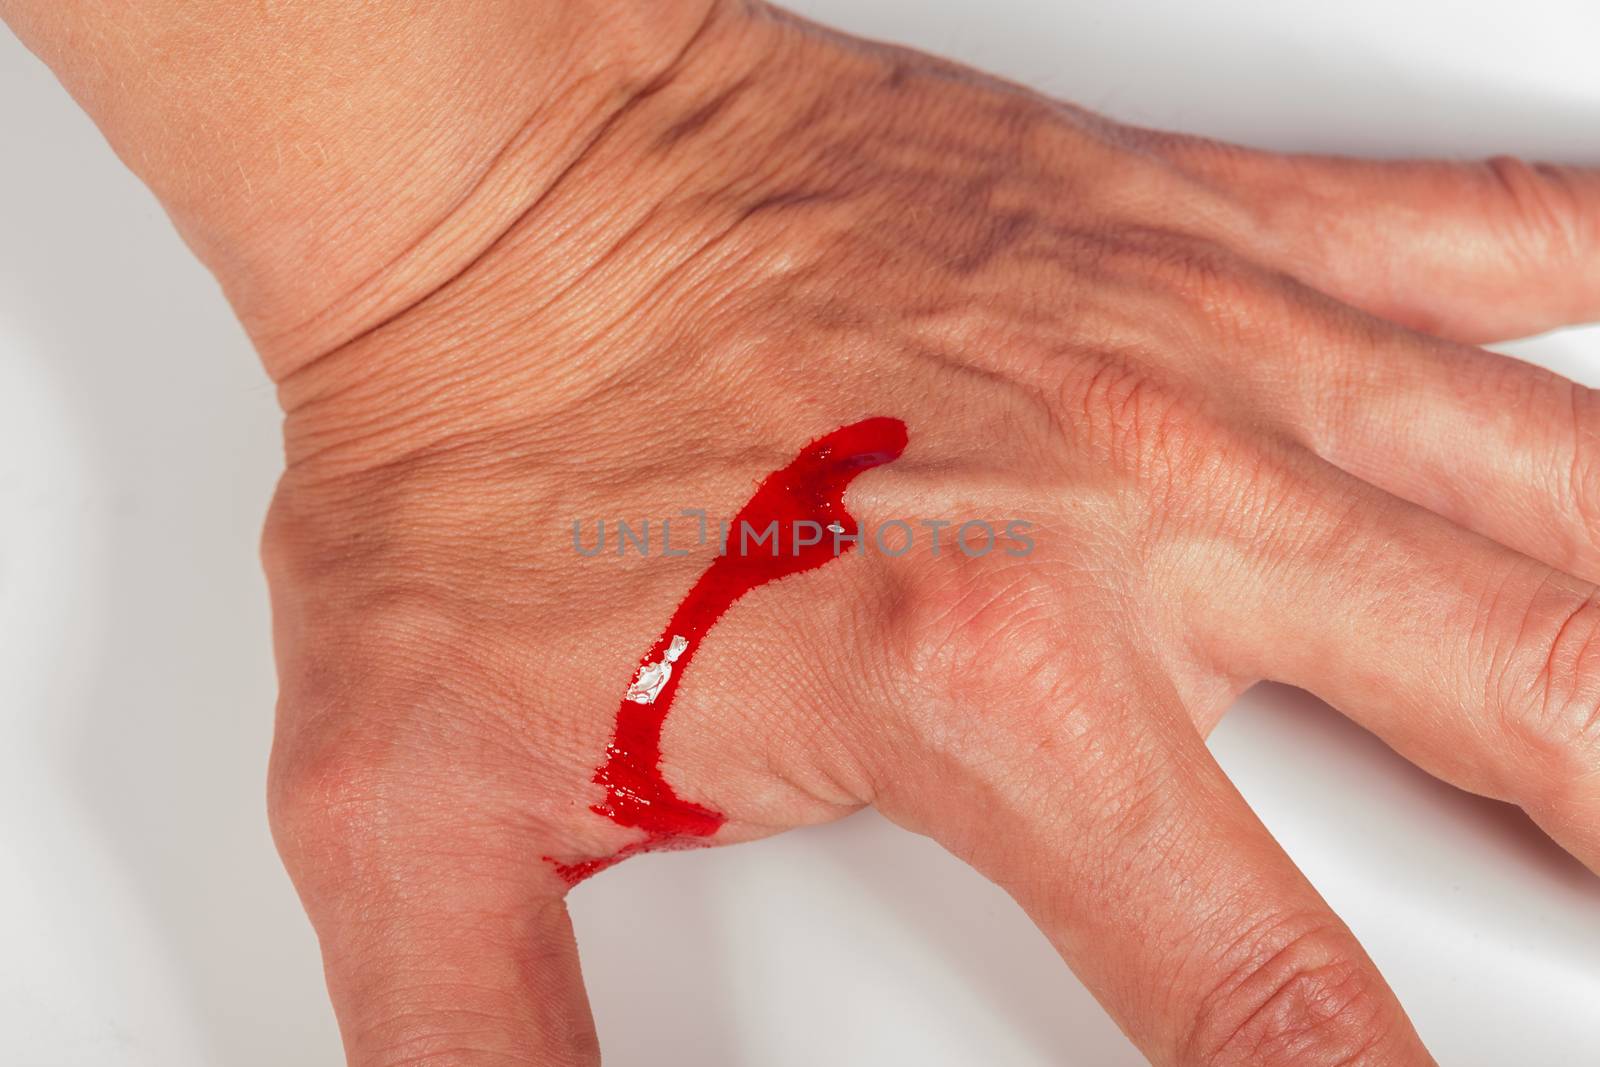 Subcutaneous medical injection concept with a small hypodermic syringe filled with a red liquid penetrating the skin and producing a flow of dripping blood in a close up view